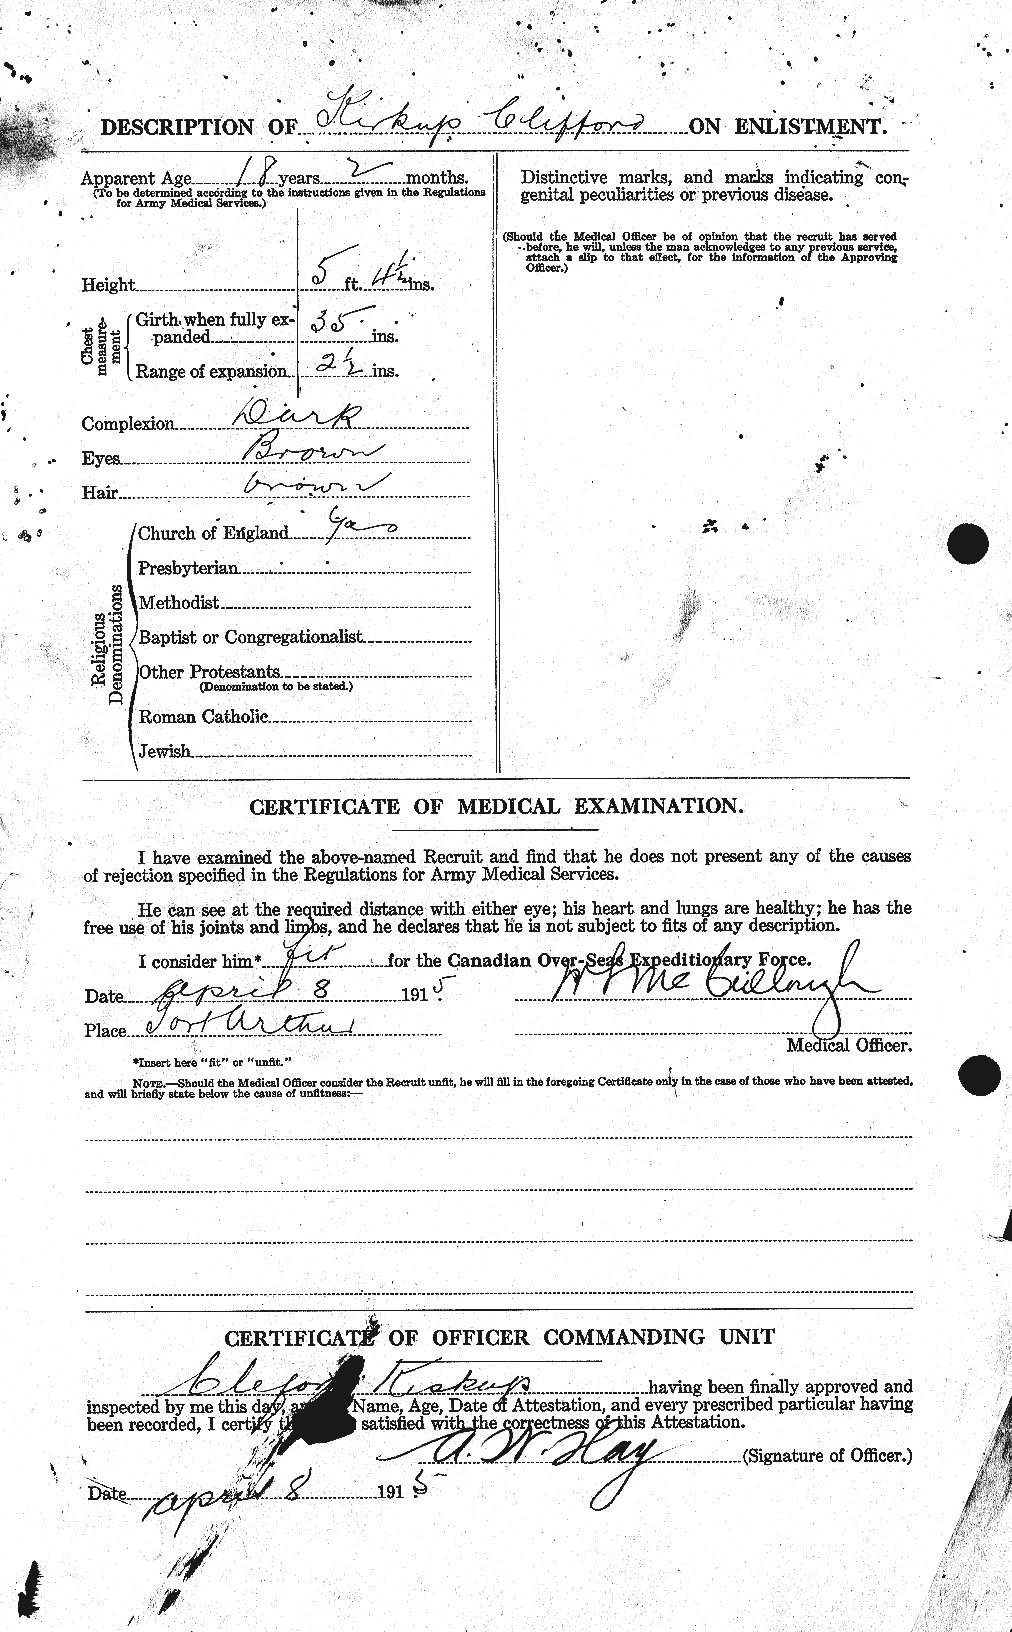 Personnel Records of the First World War - CEF 436156b